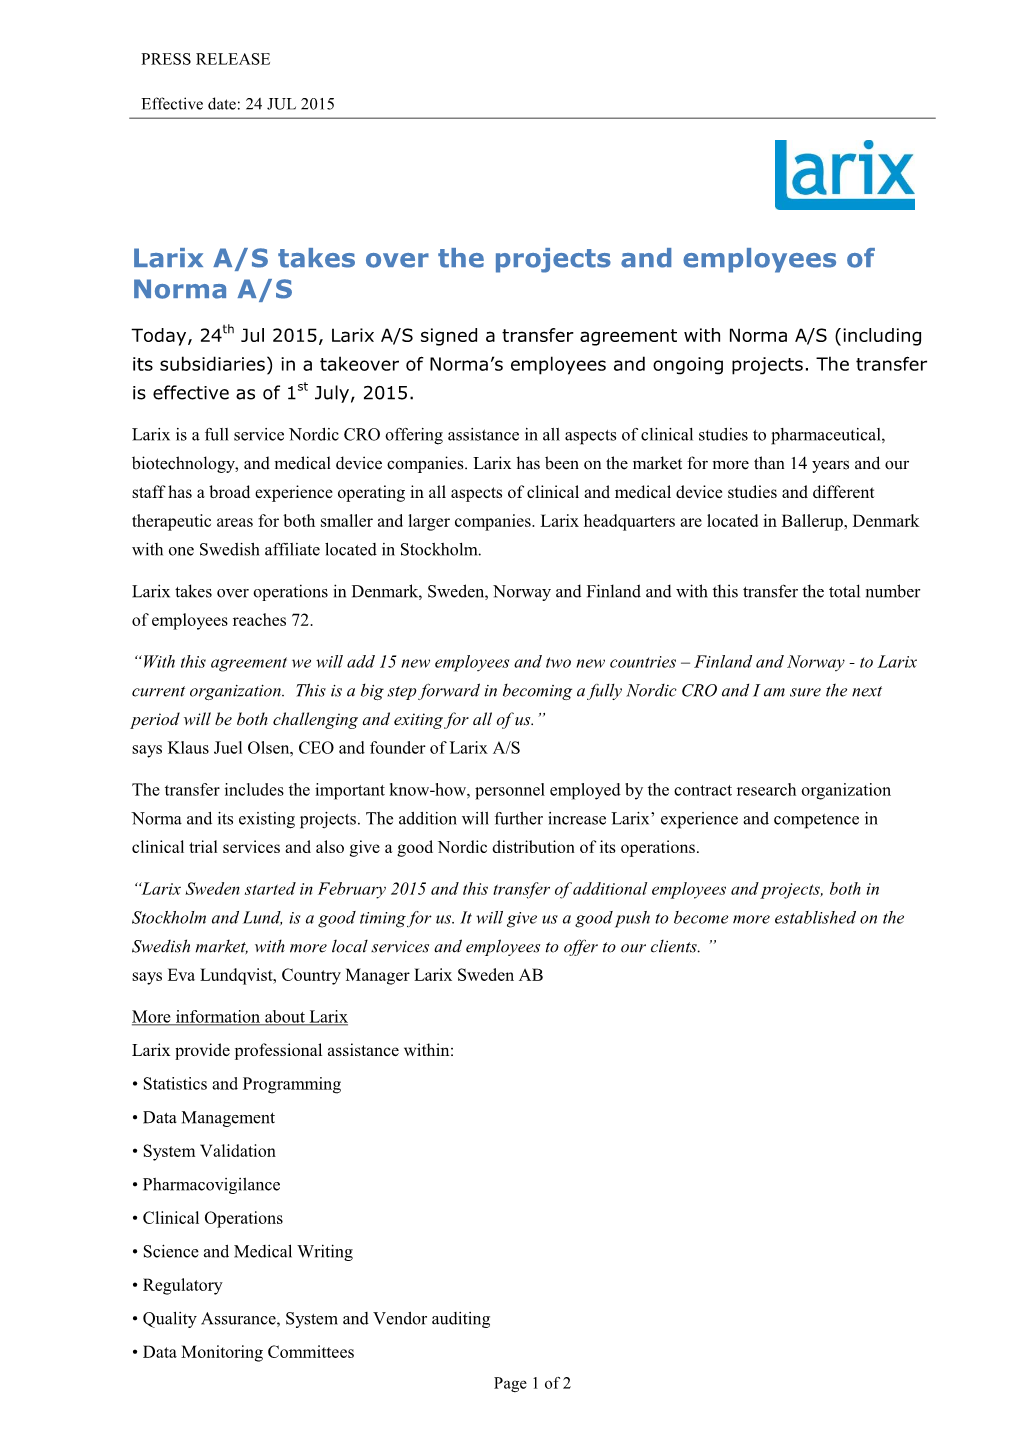 Larix A/S Takes Over the Projects and Employees of Norma A/S